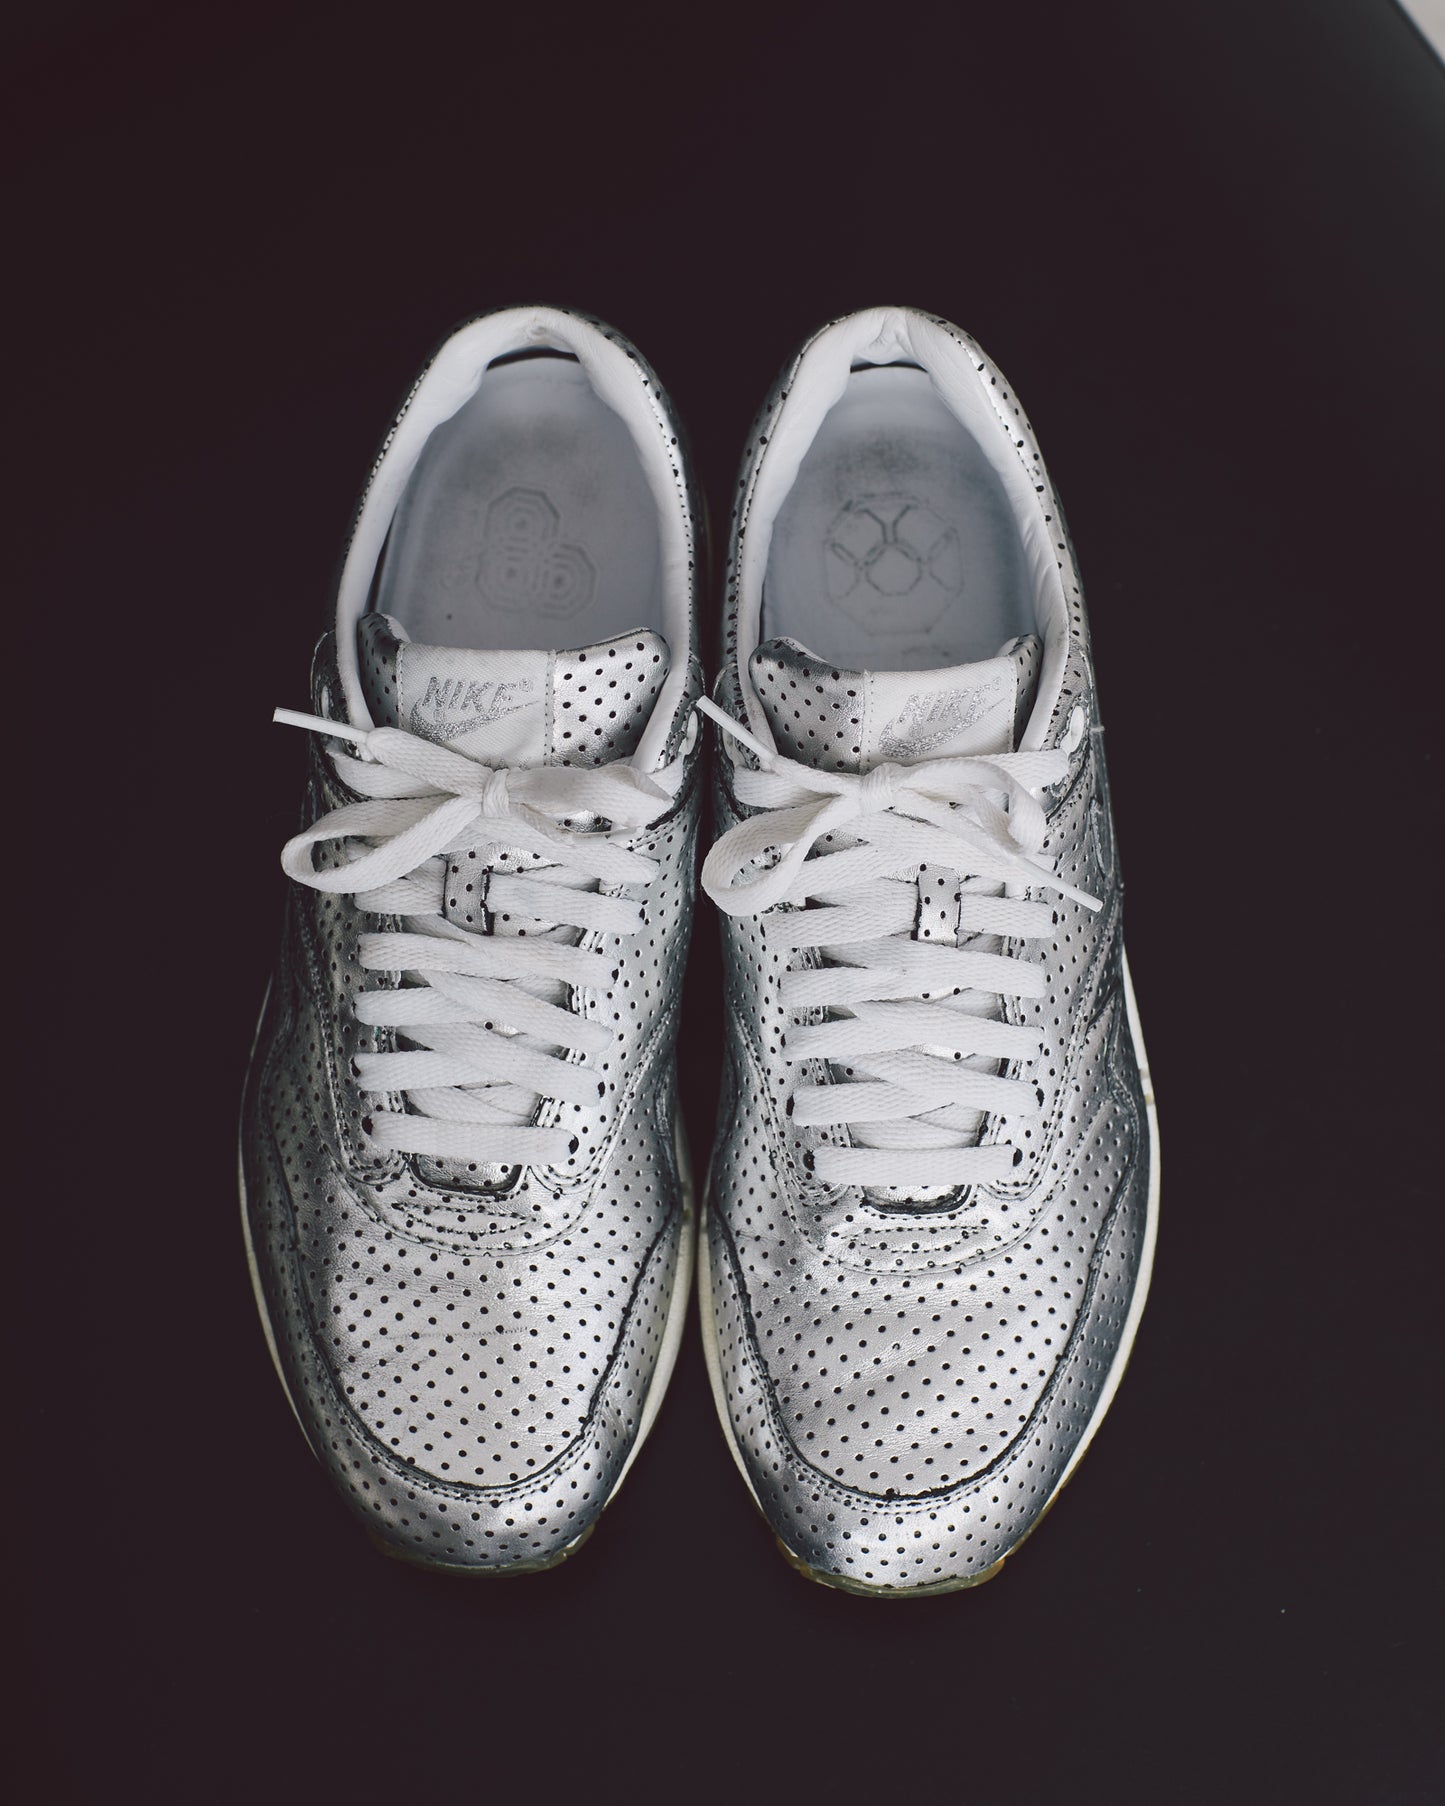 Nike x Opening Ceremony Air Max 1 (9.5) silver